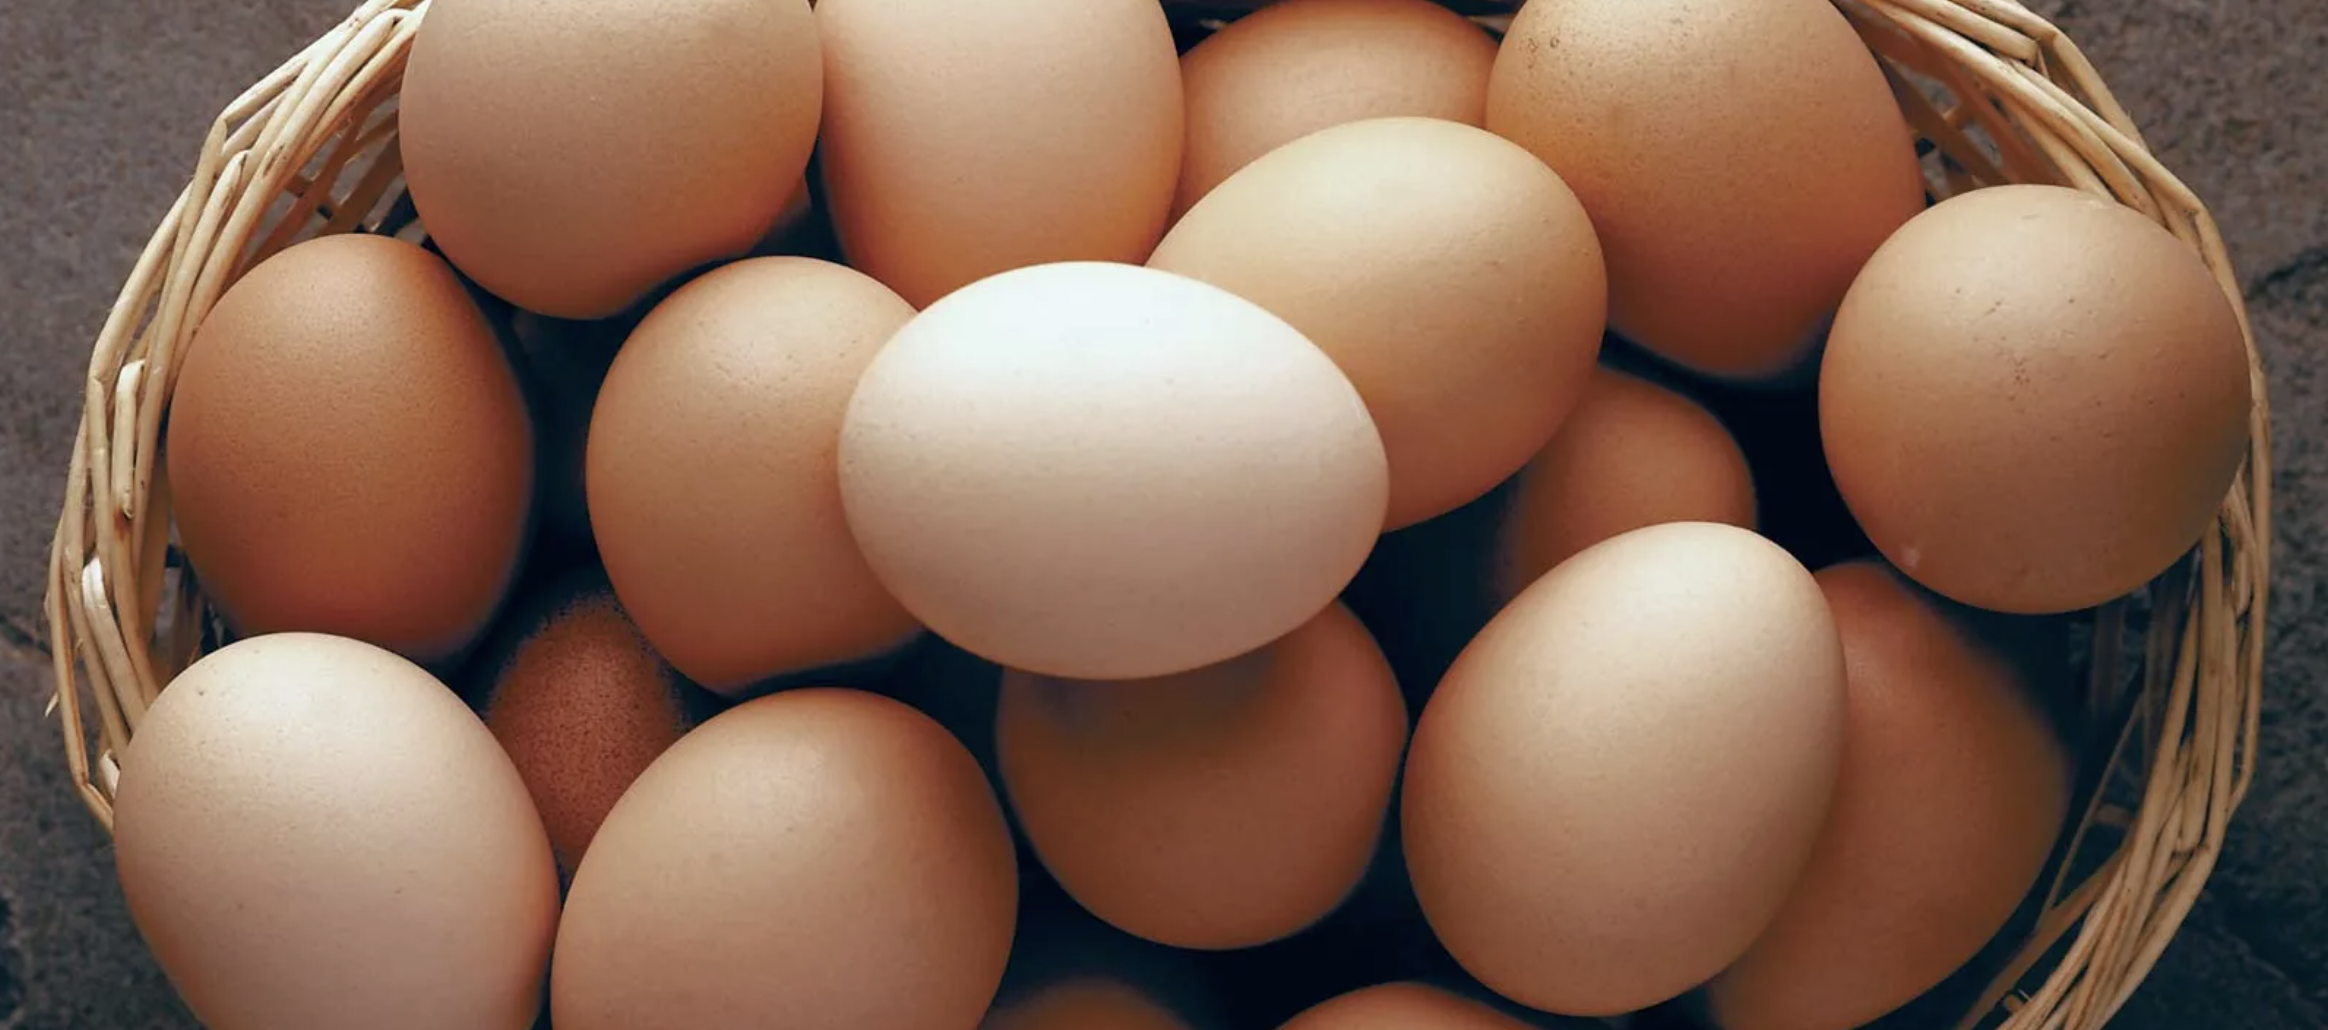 9 Health Benefits of Eating Eggs